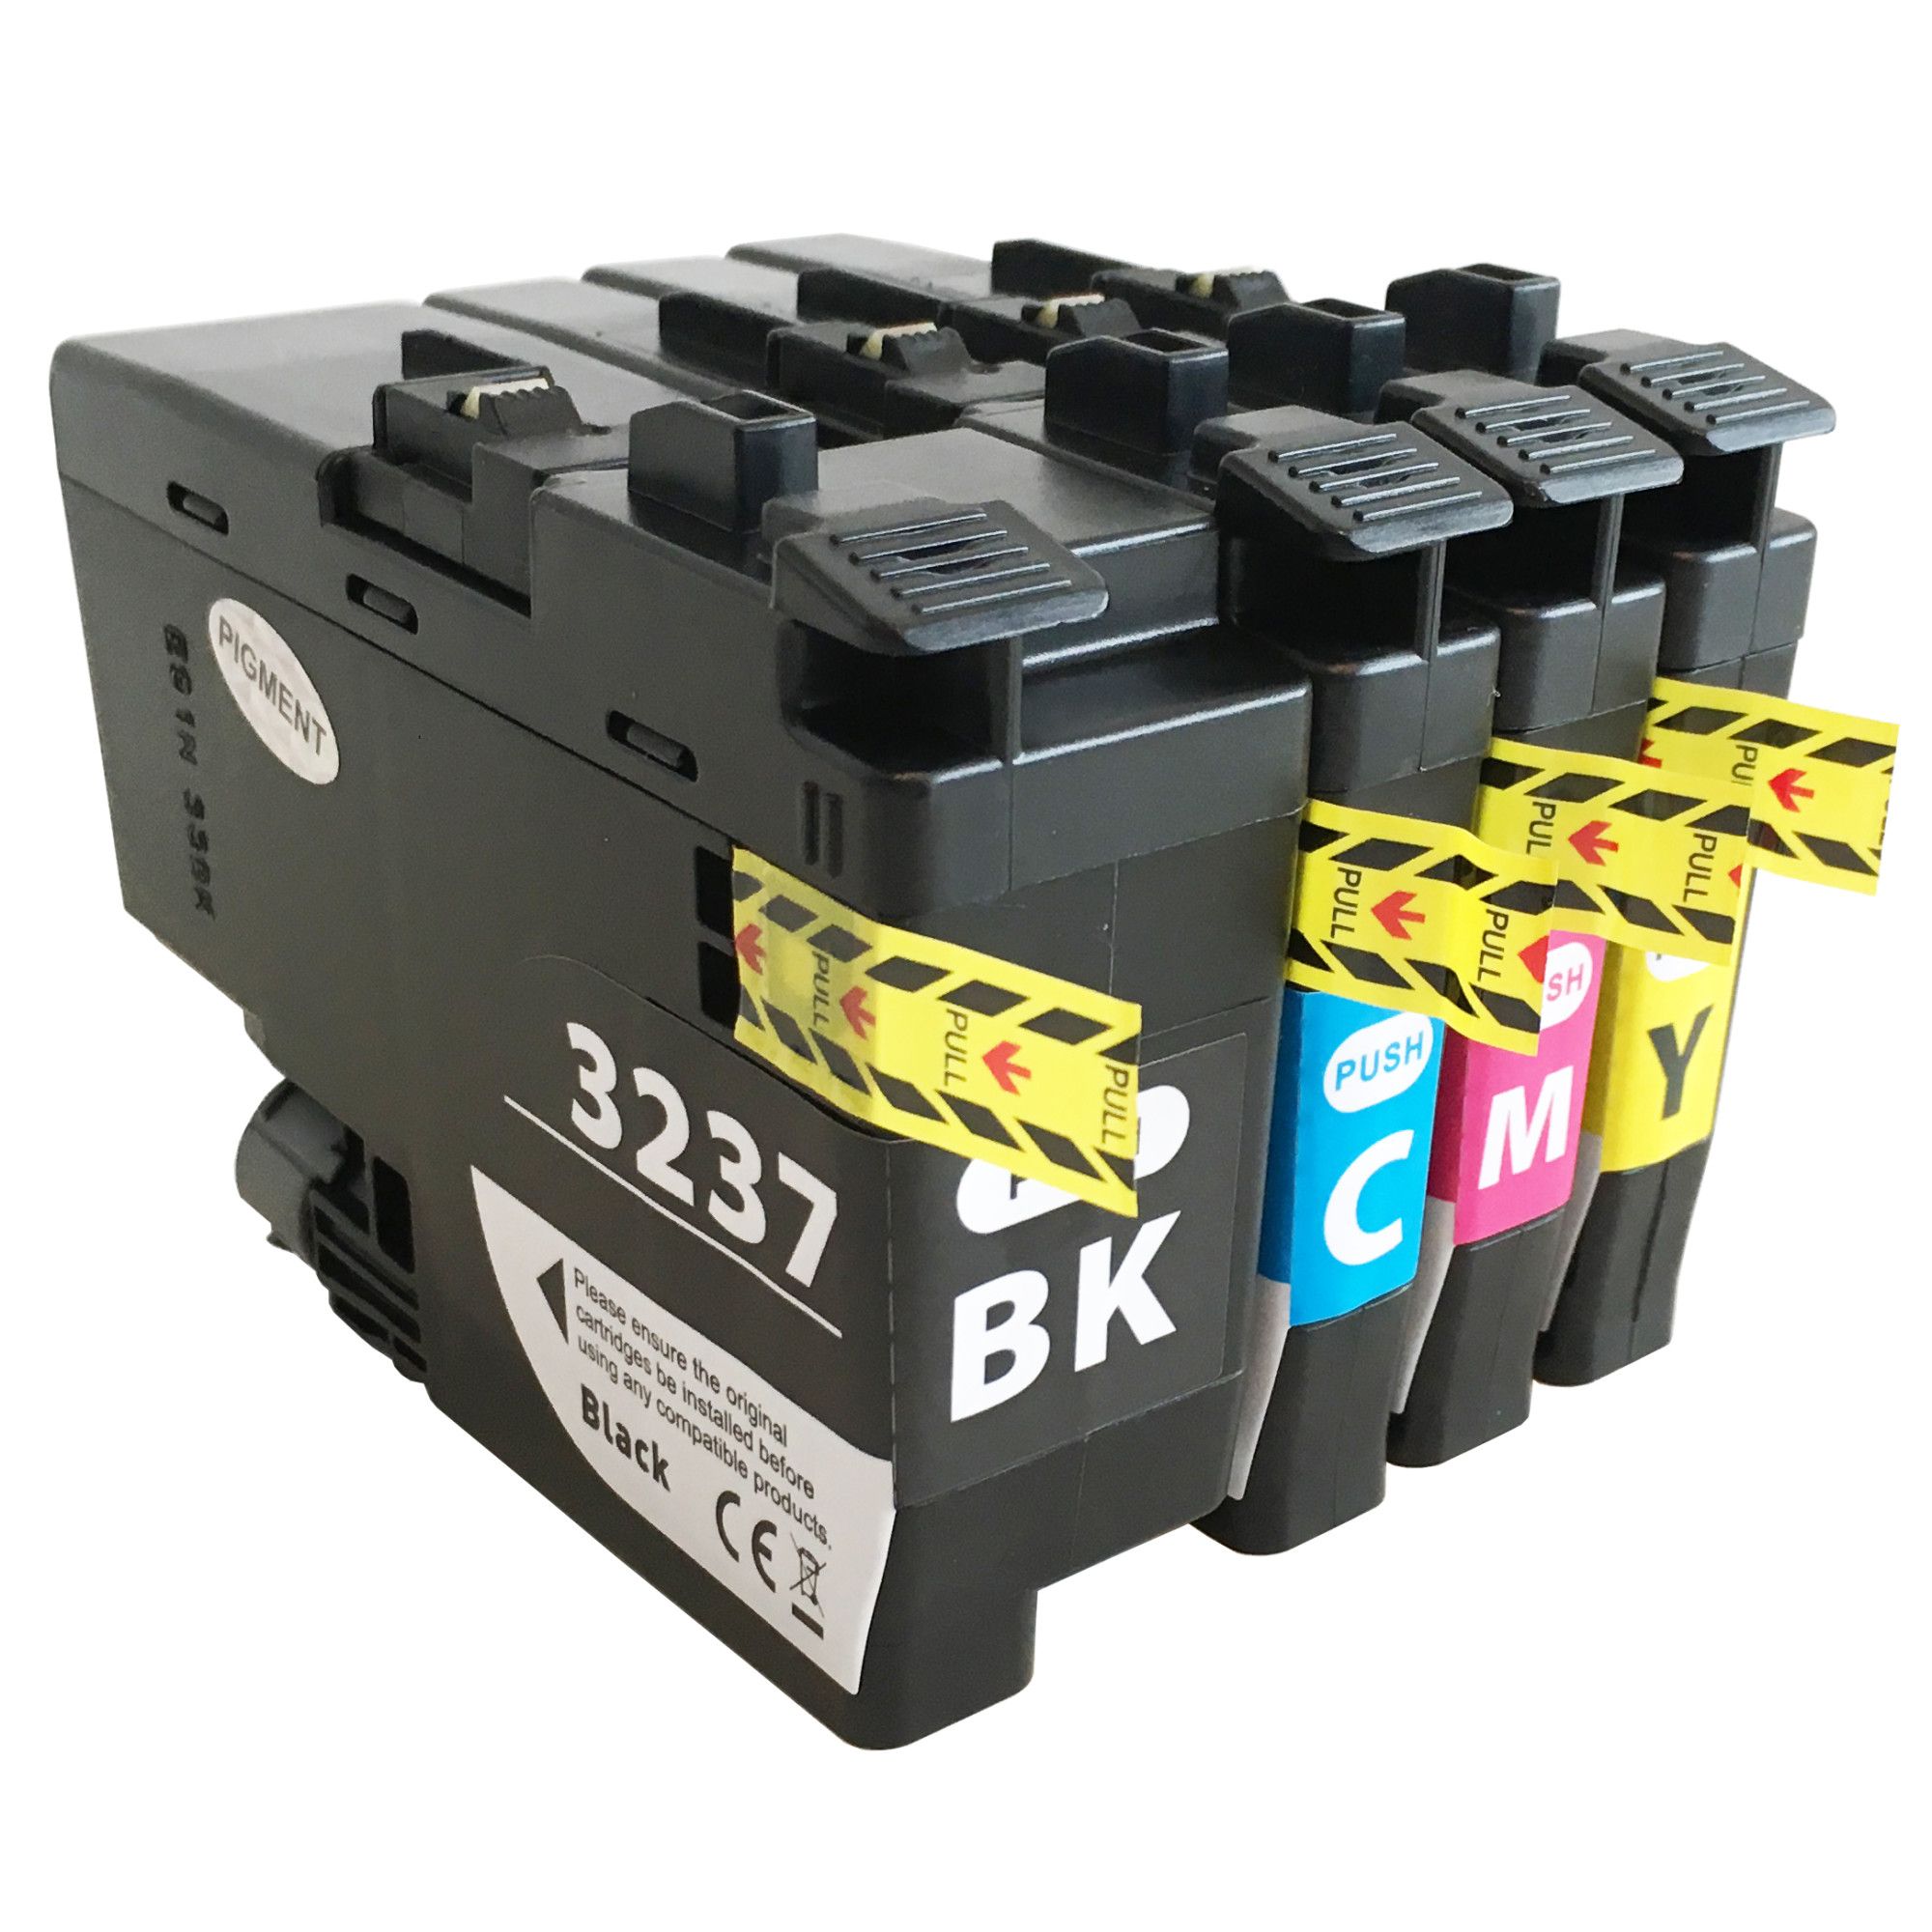 Tru Image Brother LC3237 Multi Pack Ink Cartridge Compatible LC3237BK/LC3237C/LC3237M/LC3237Y)